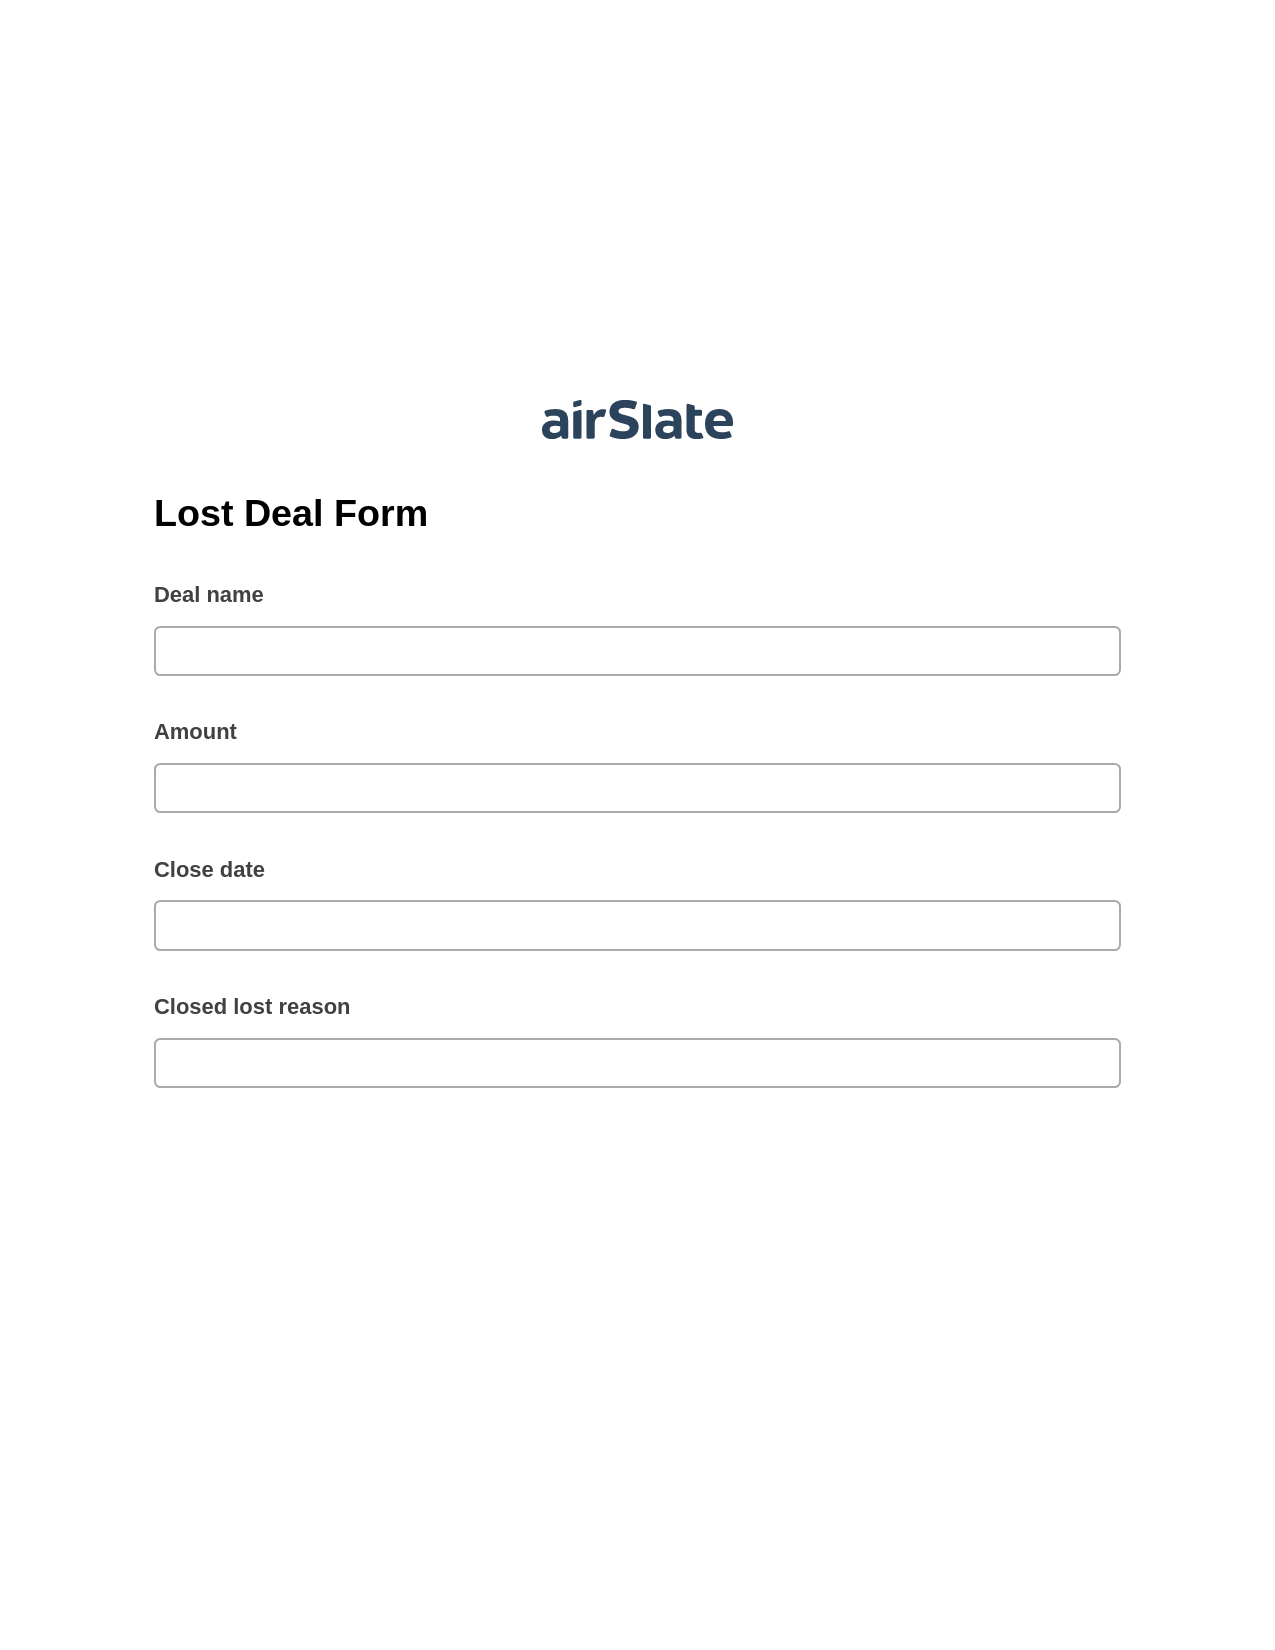 Lost Deal Form Prefill from NetSuite records, Add Tags to Slate Bot, Archive to SharePoint Folder Bot